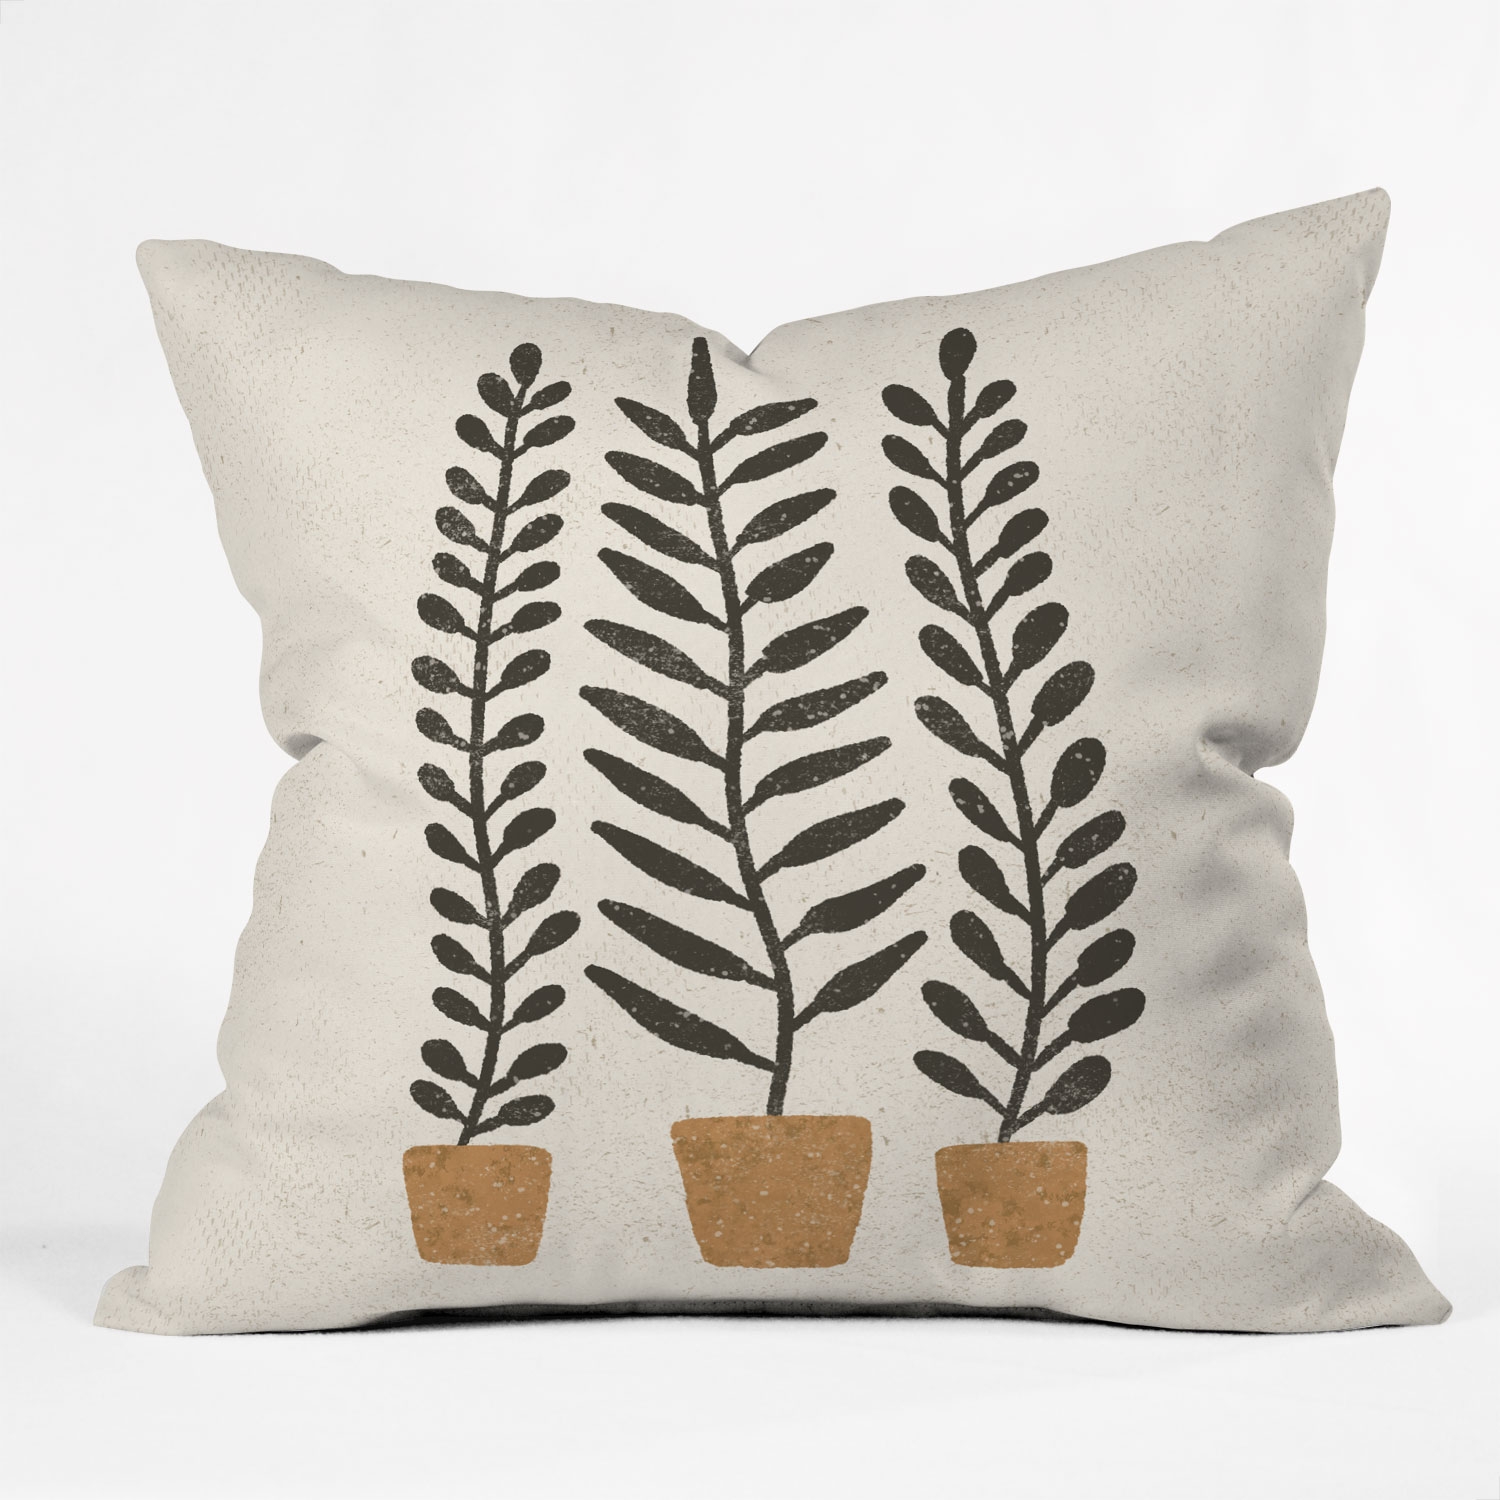 Potted Ferns Black Terracotta by Pauline Stanley - Outdoor Throw Pillow 18" x 18" - Image 1